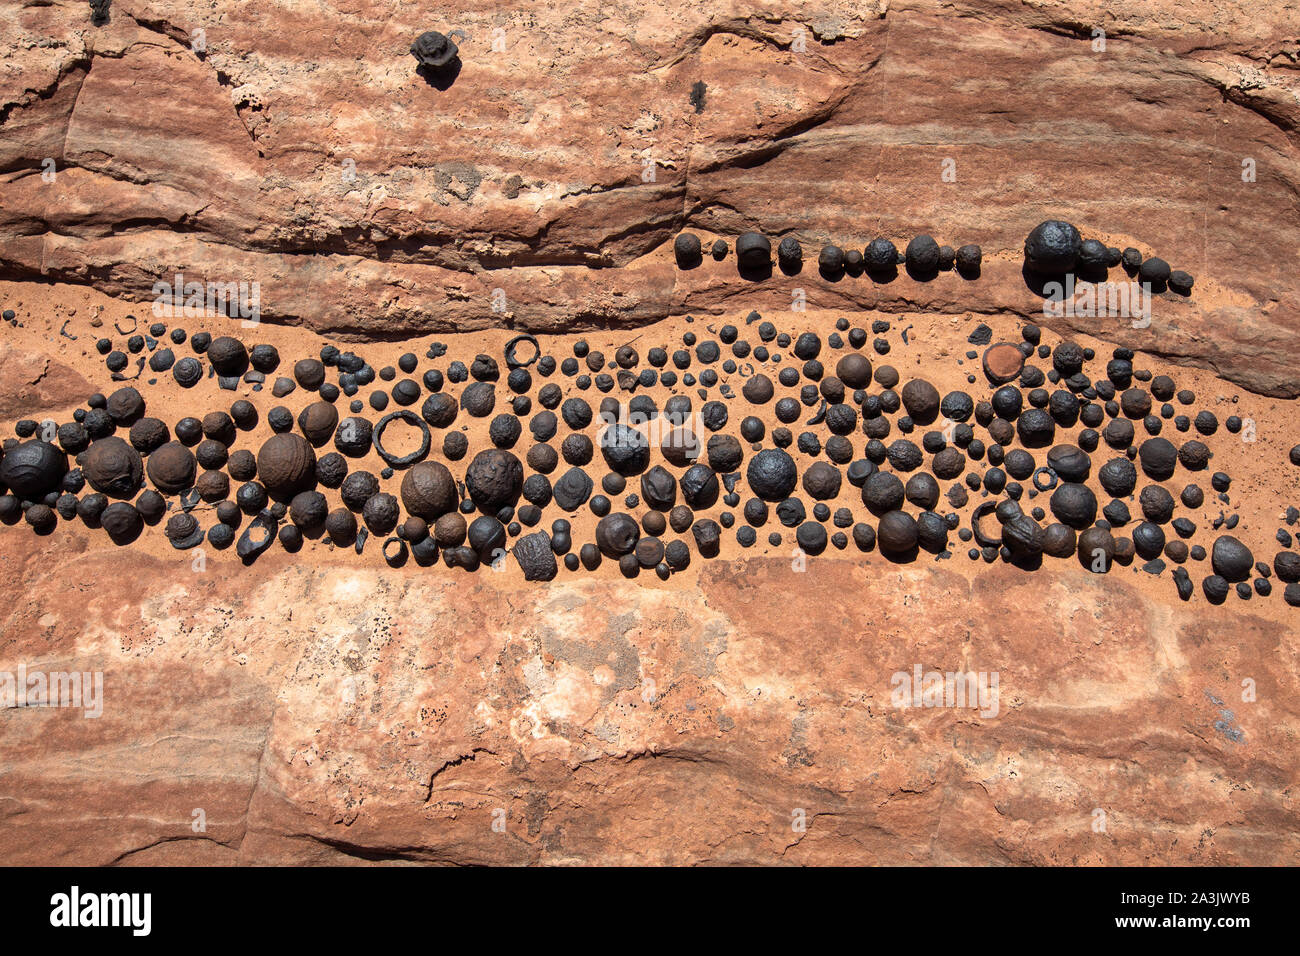 Hematite concretions and Moqui marbles, an unusual rock formation in Grand Staircase Escalente National Monument Stock Photo